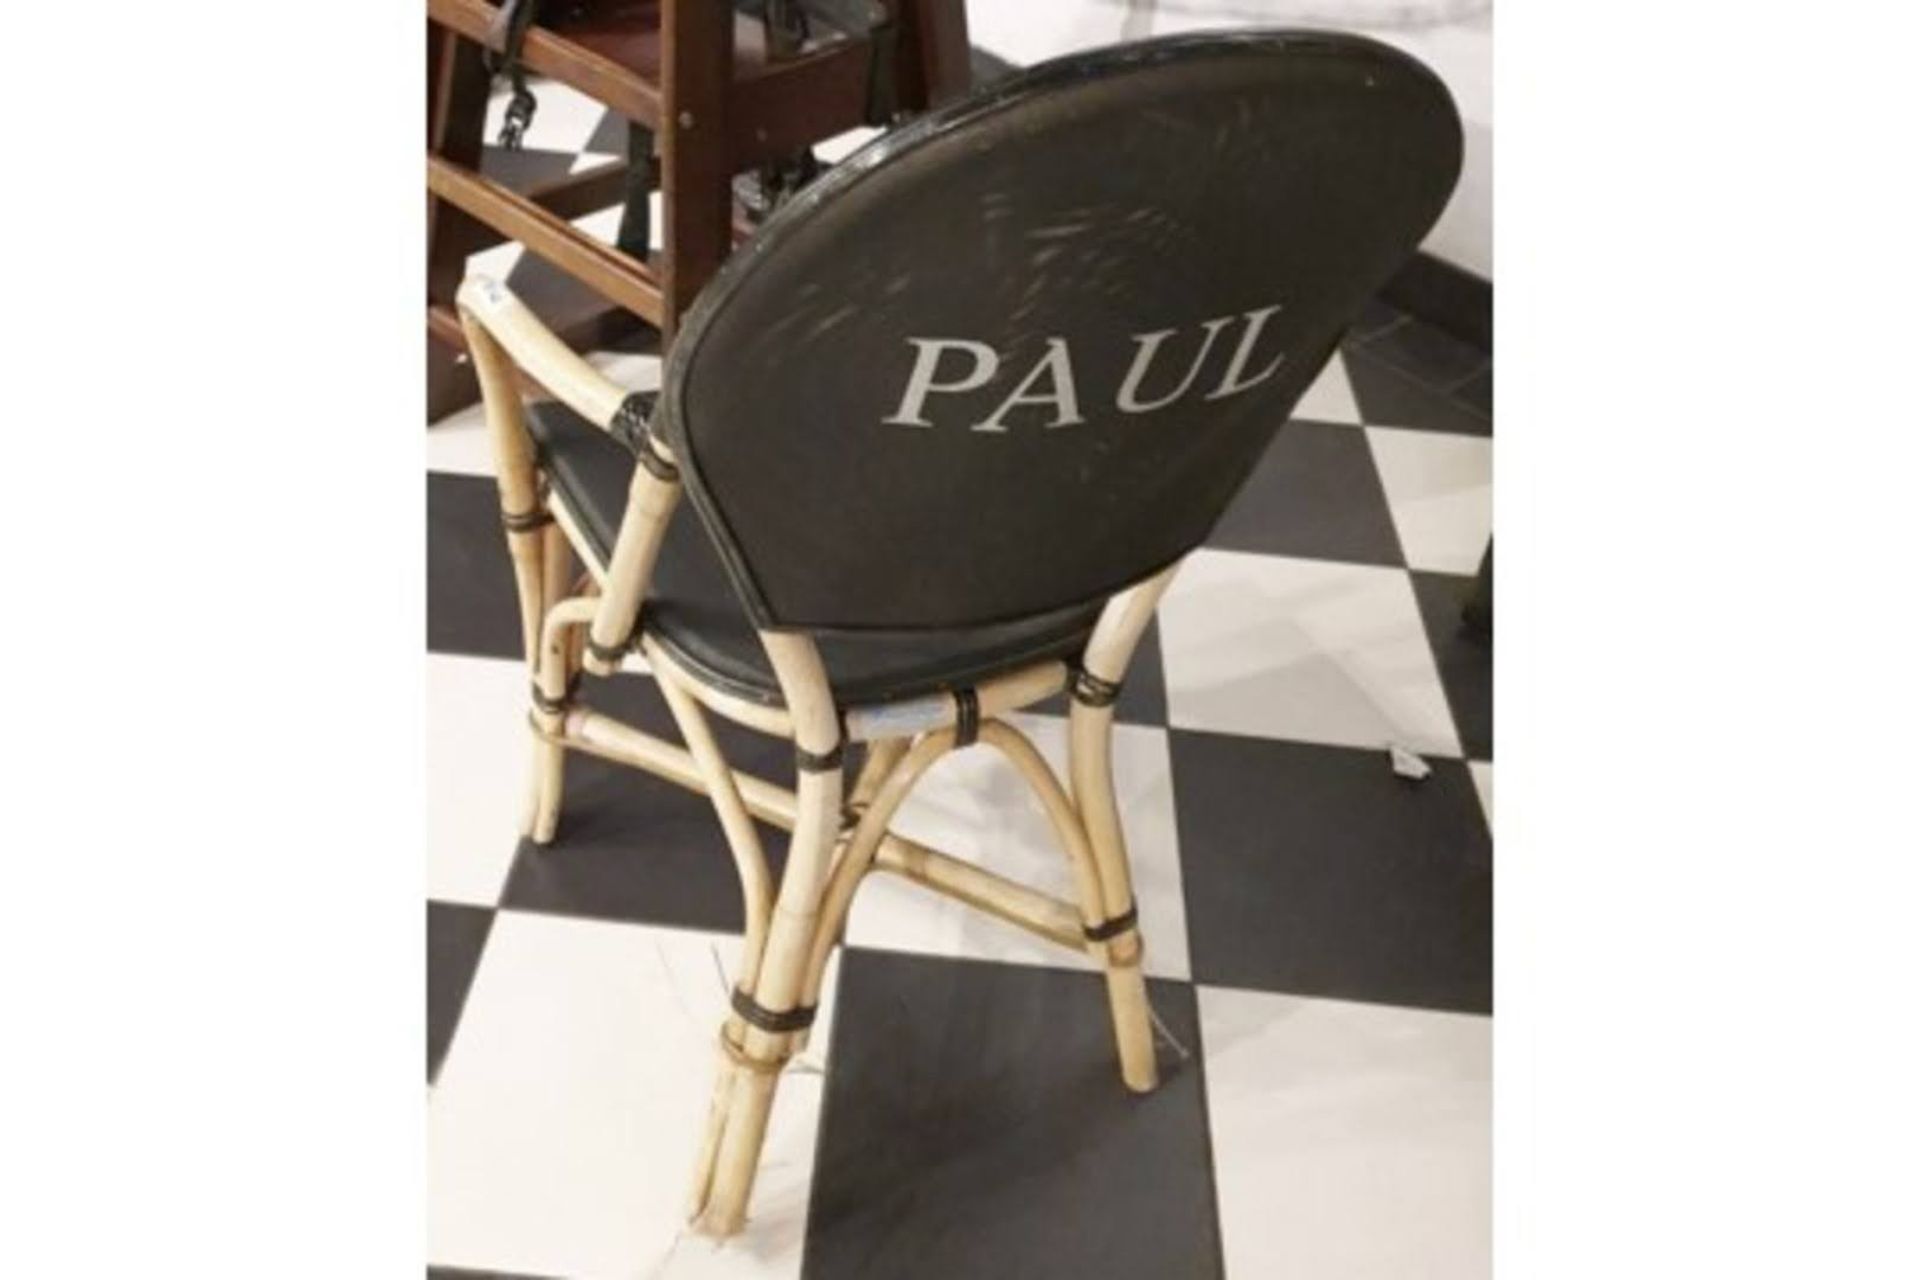 2 x Bamboo Studio Chair With Black Seat and Back Rest - Features the Name 'PAUL' Printed on the Back - Image 6 of 6